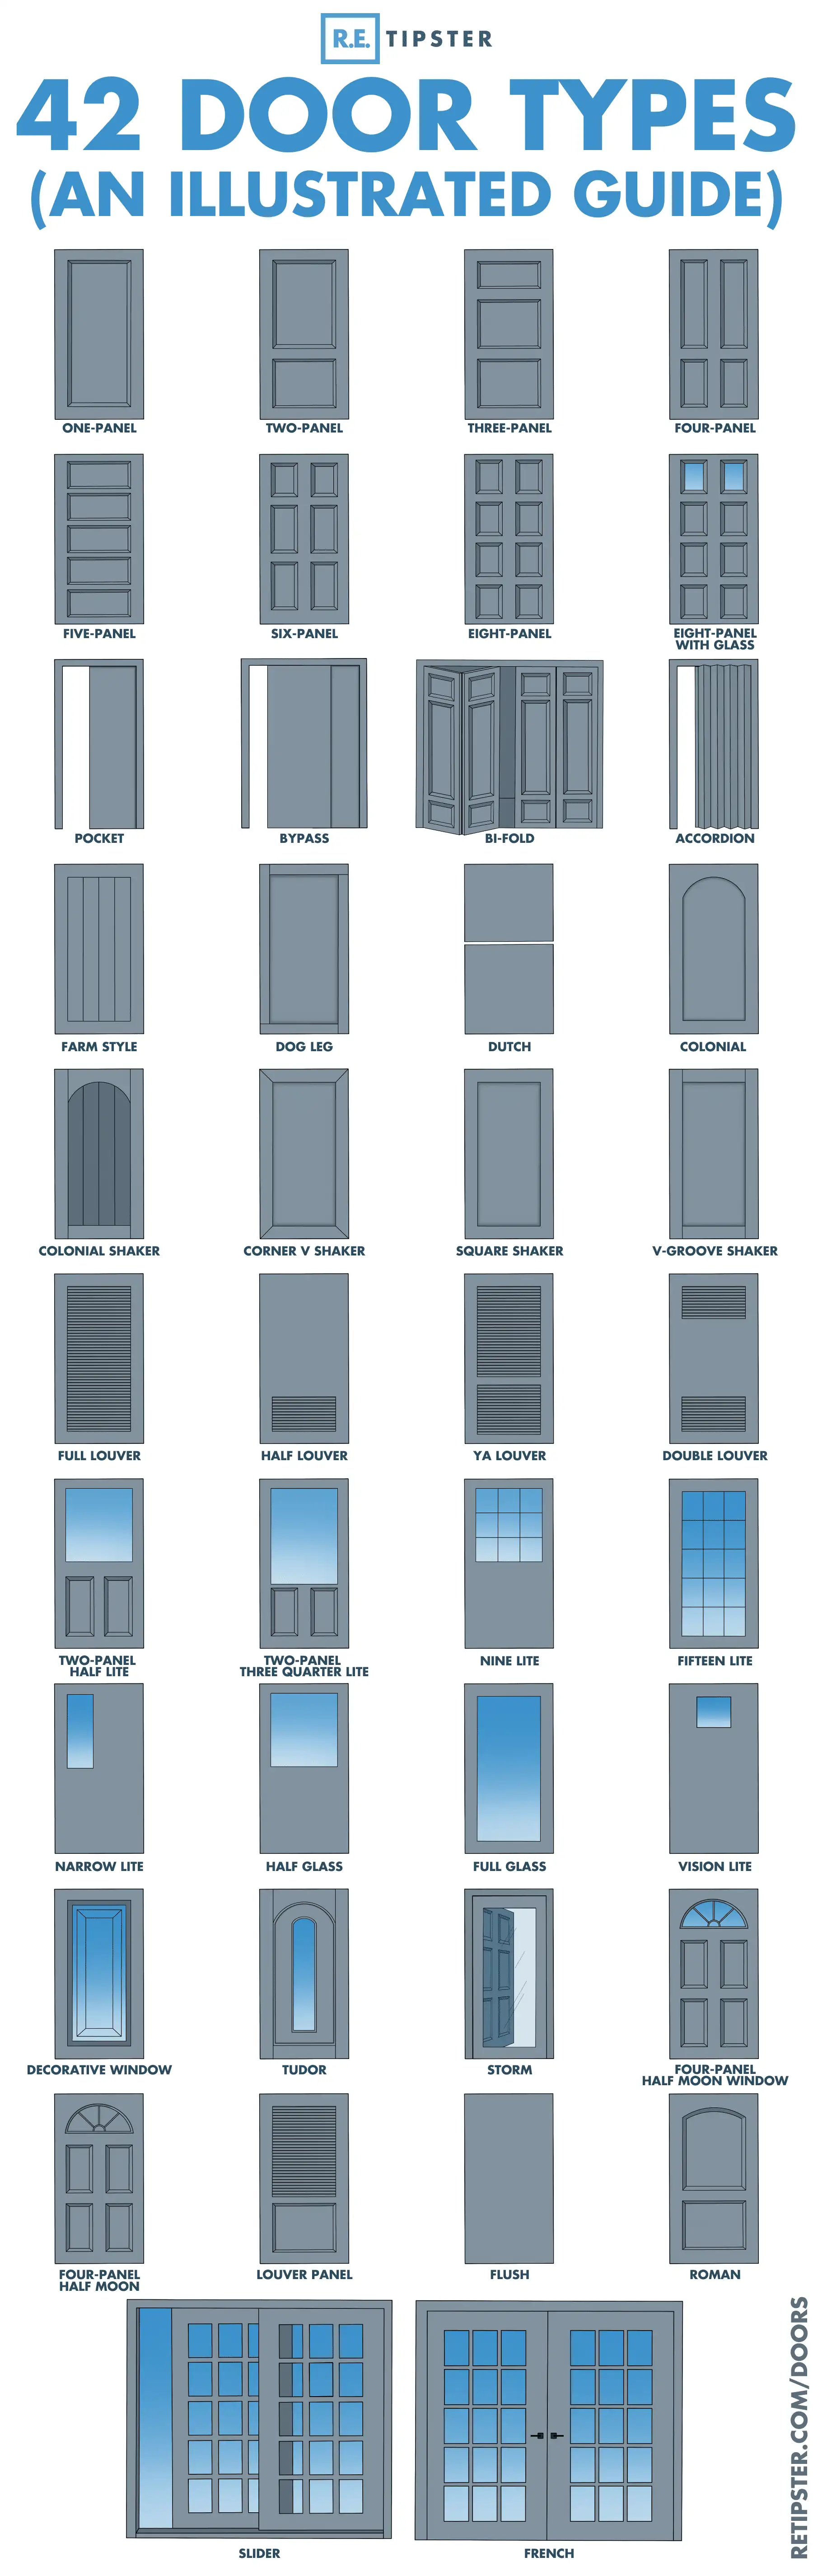 42 Door Types - An Illustrated Guide